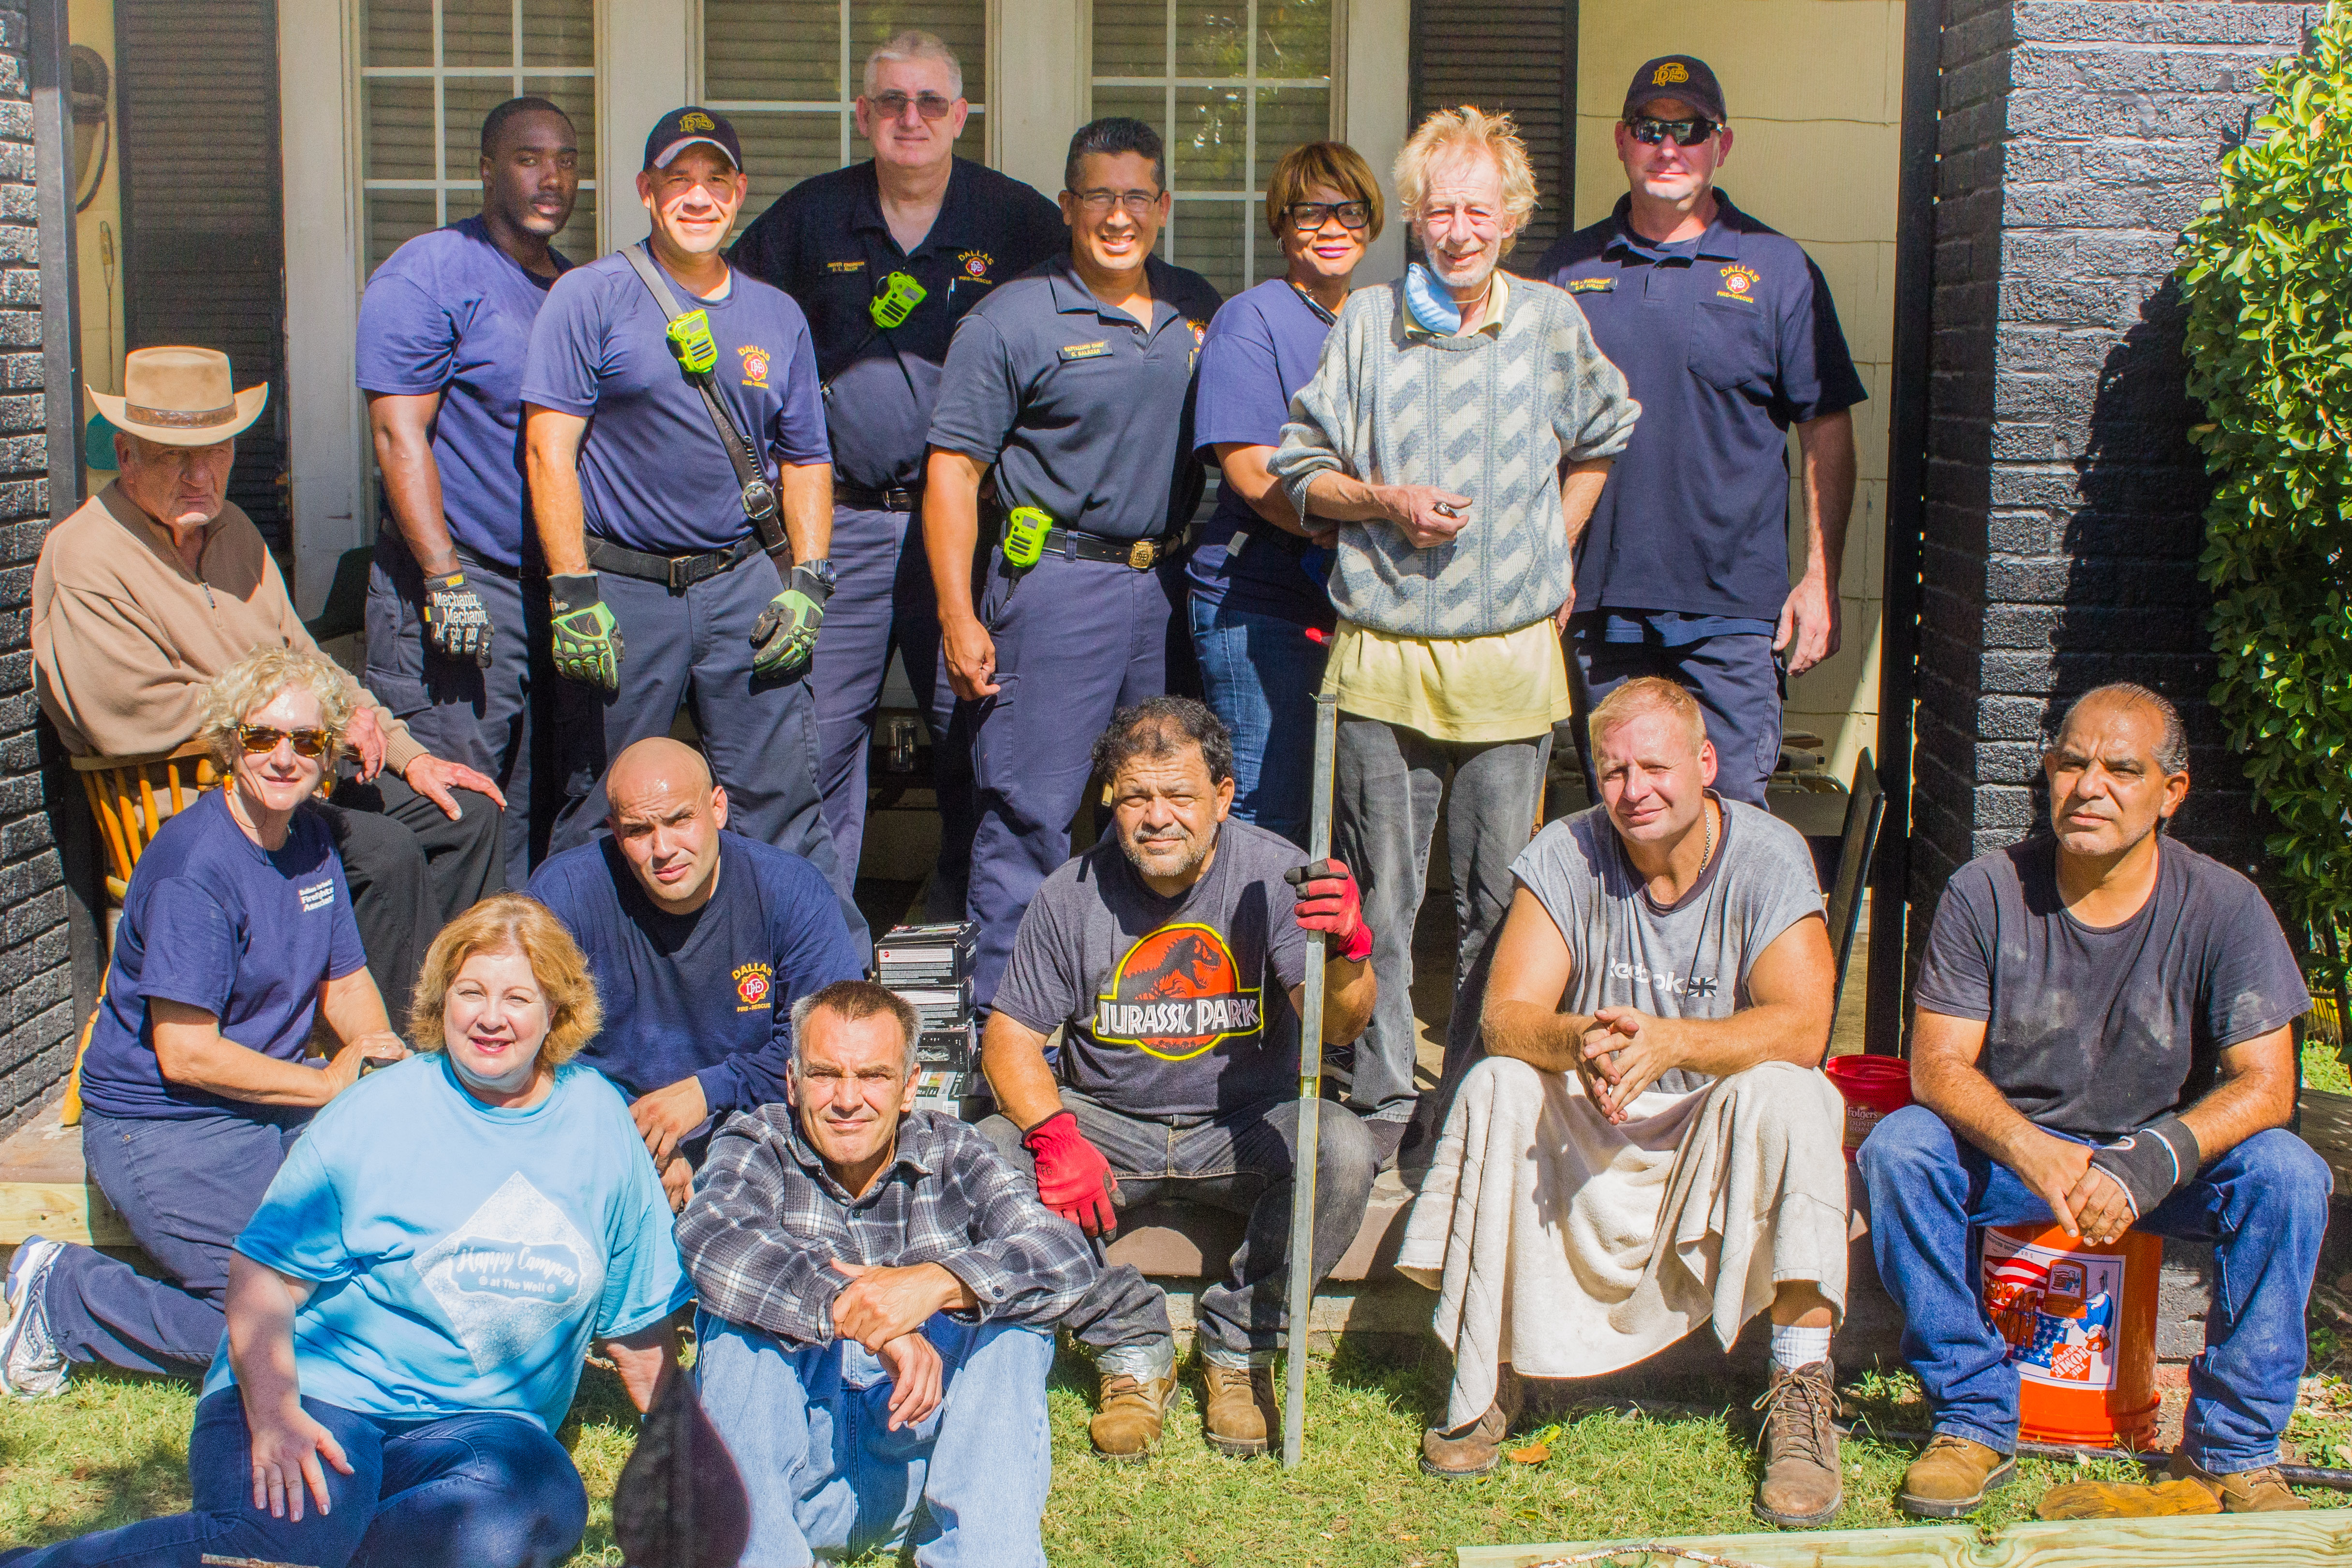 Christian Firefighters Association and Jacob House Residents